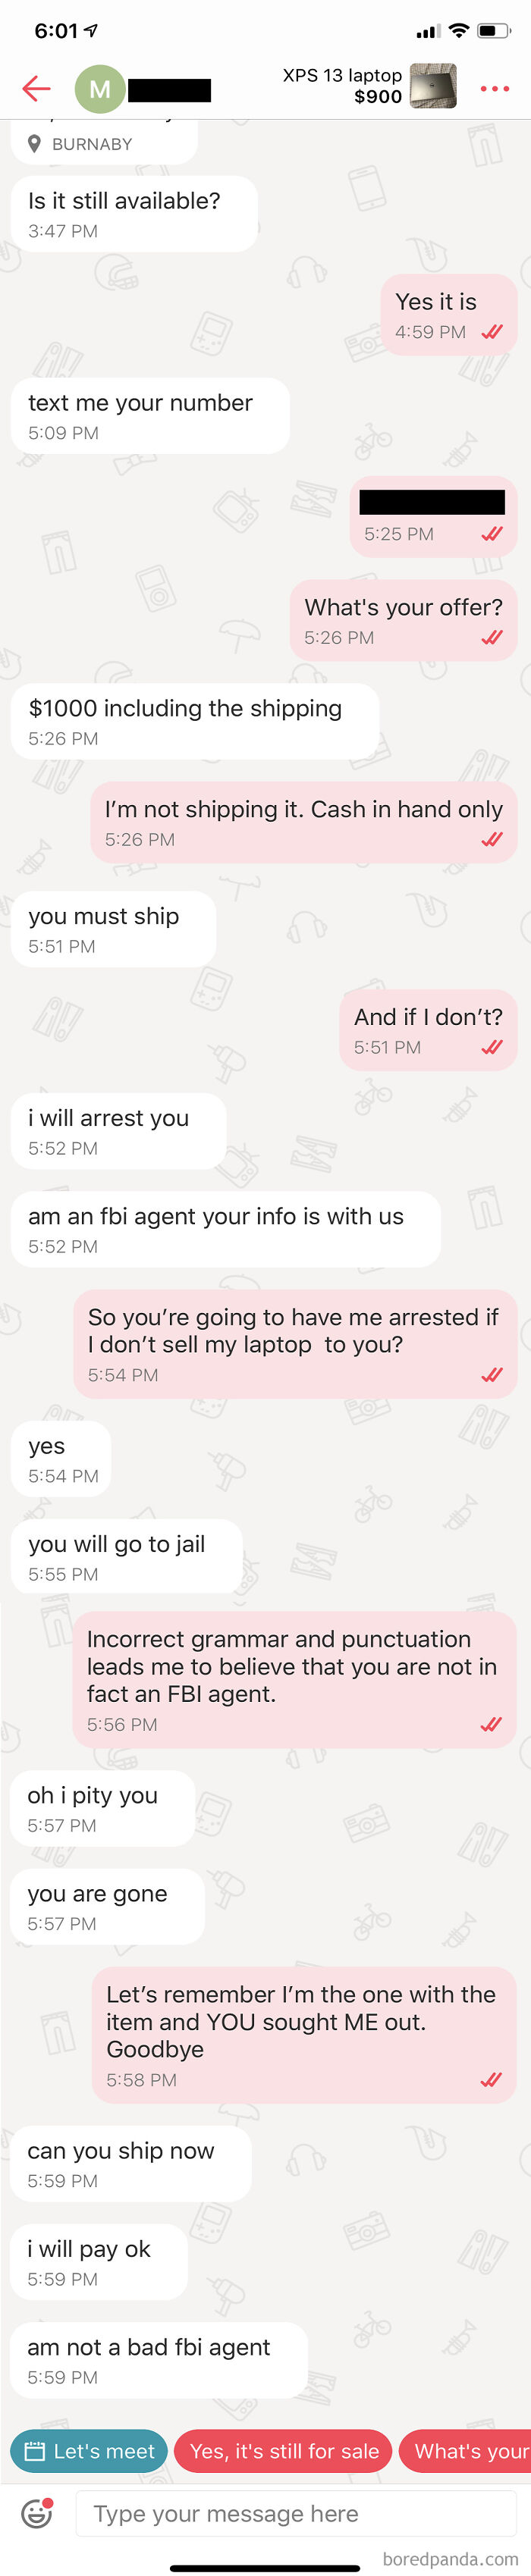 At Least He's Not A Bad FBI Agent